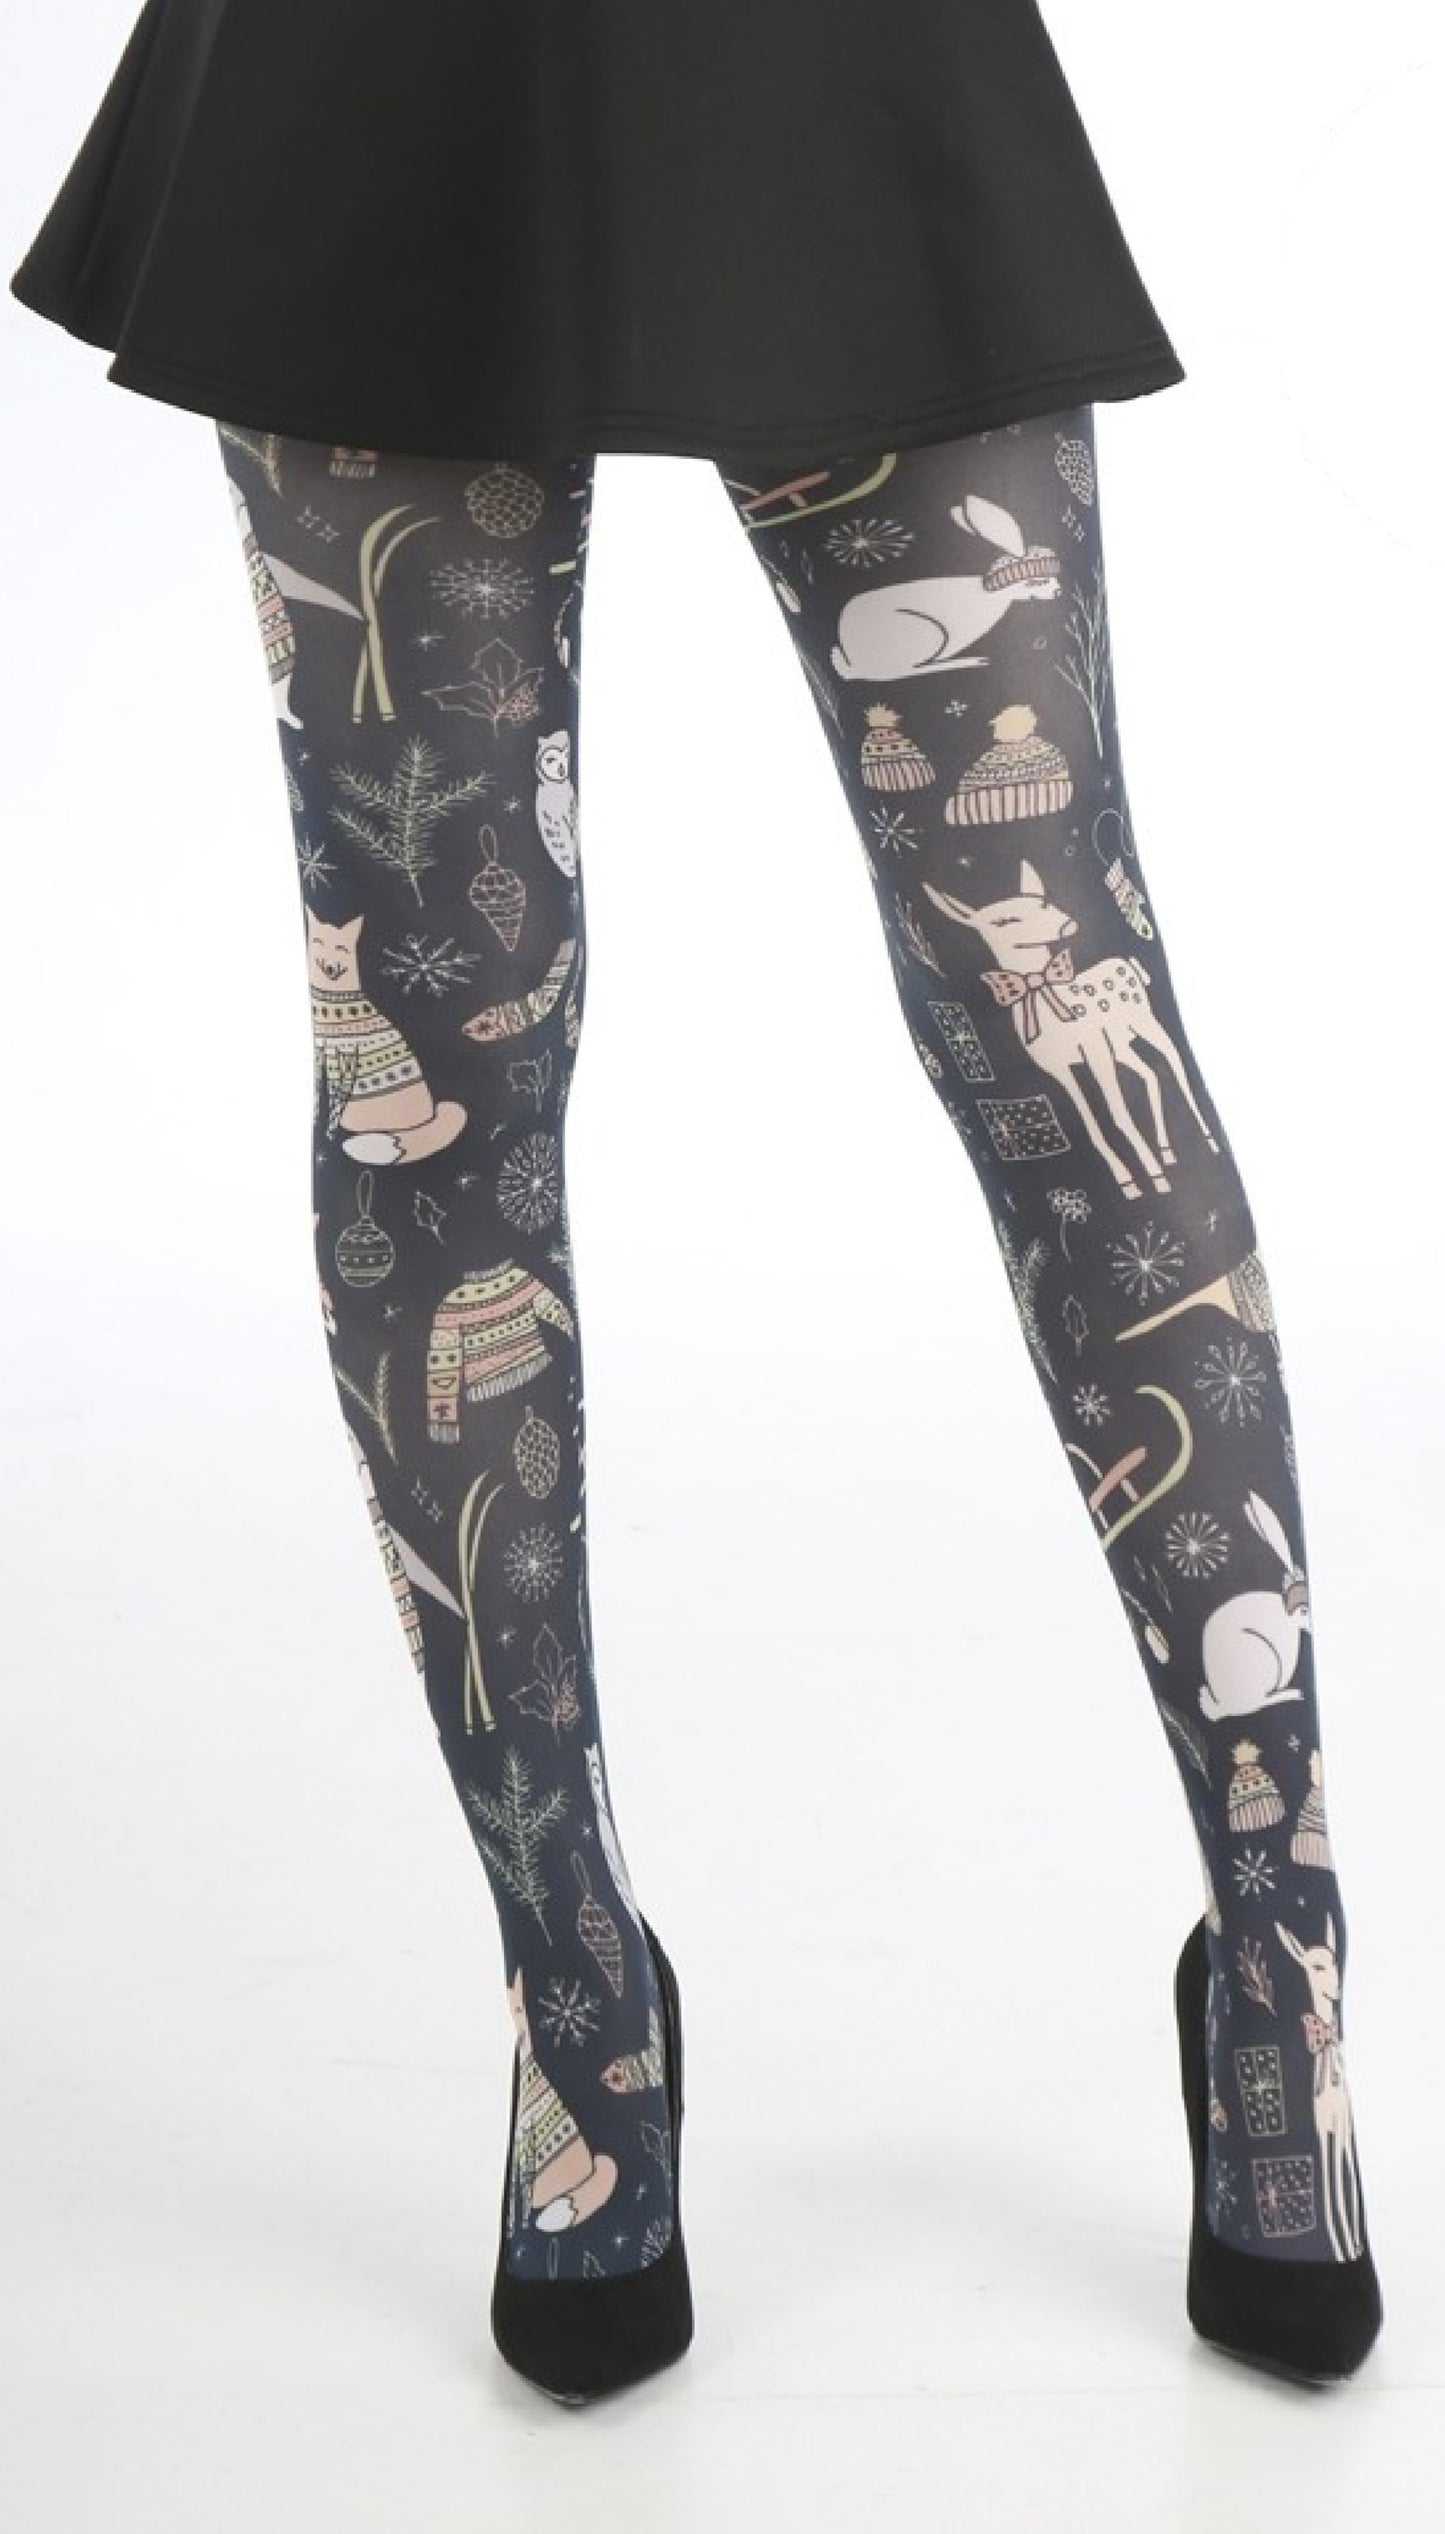 Pamela Mann Christams Woodland Animals - Printed Christmas tights with cute all over illustrated animals including, deer, penguins, foxes, rabbits, owls etc. on a black background.